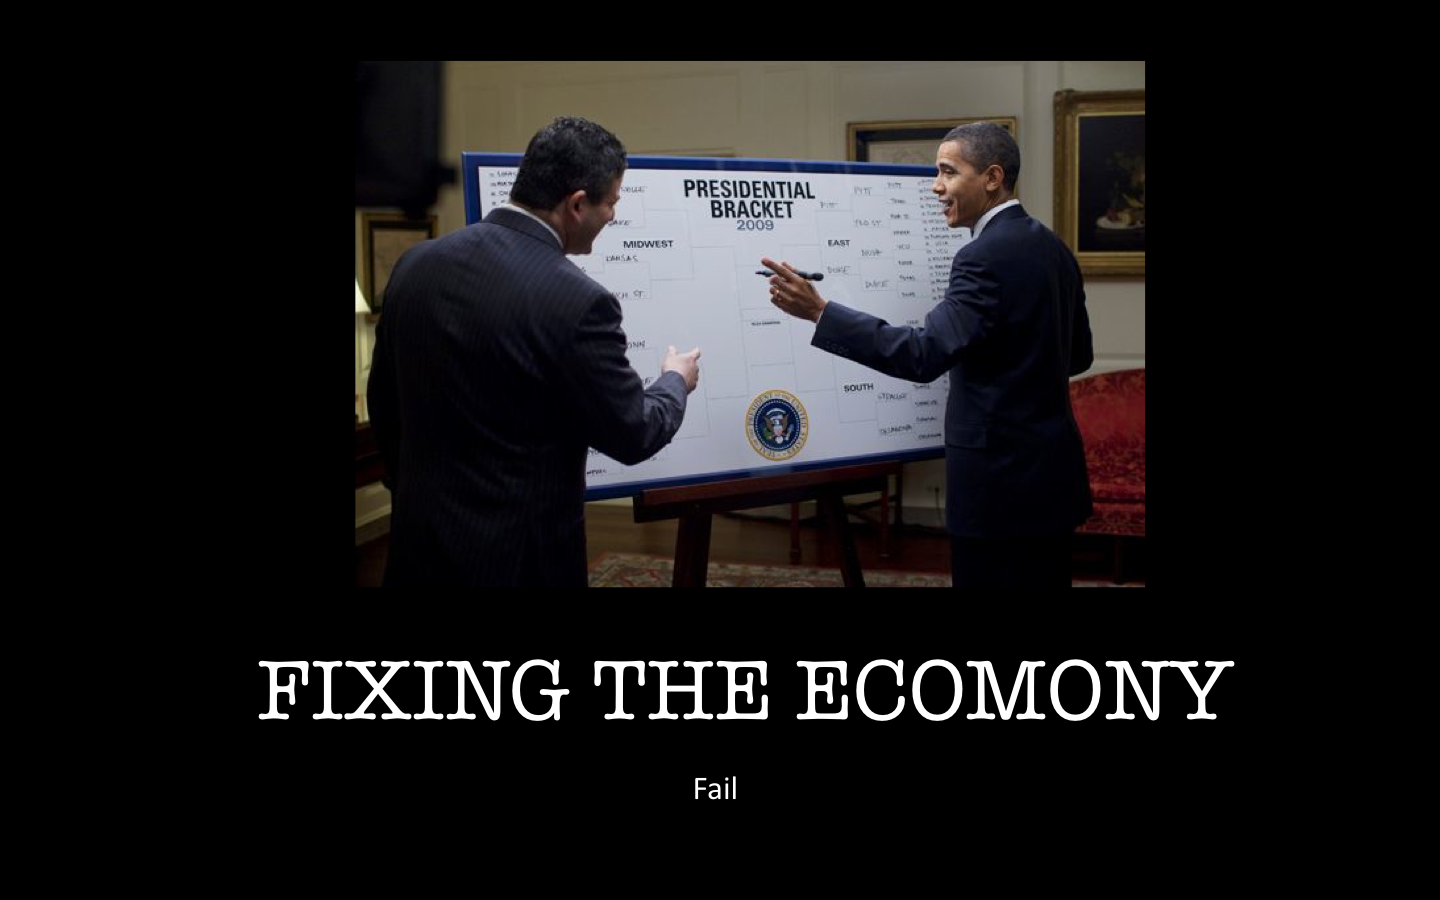 Obama lays out his plan to fix the economy ............ just as soon as he gets his bracket finished